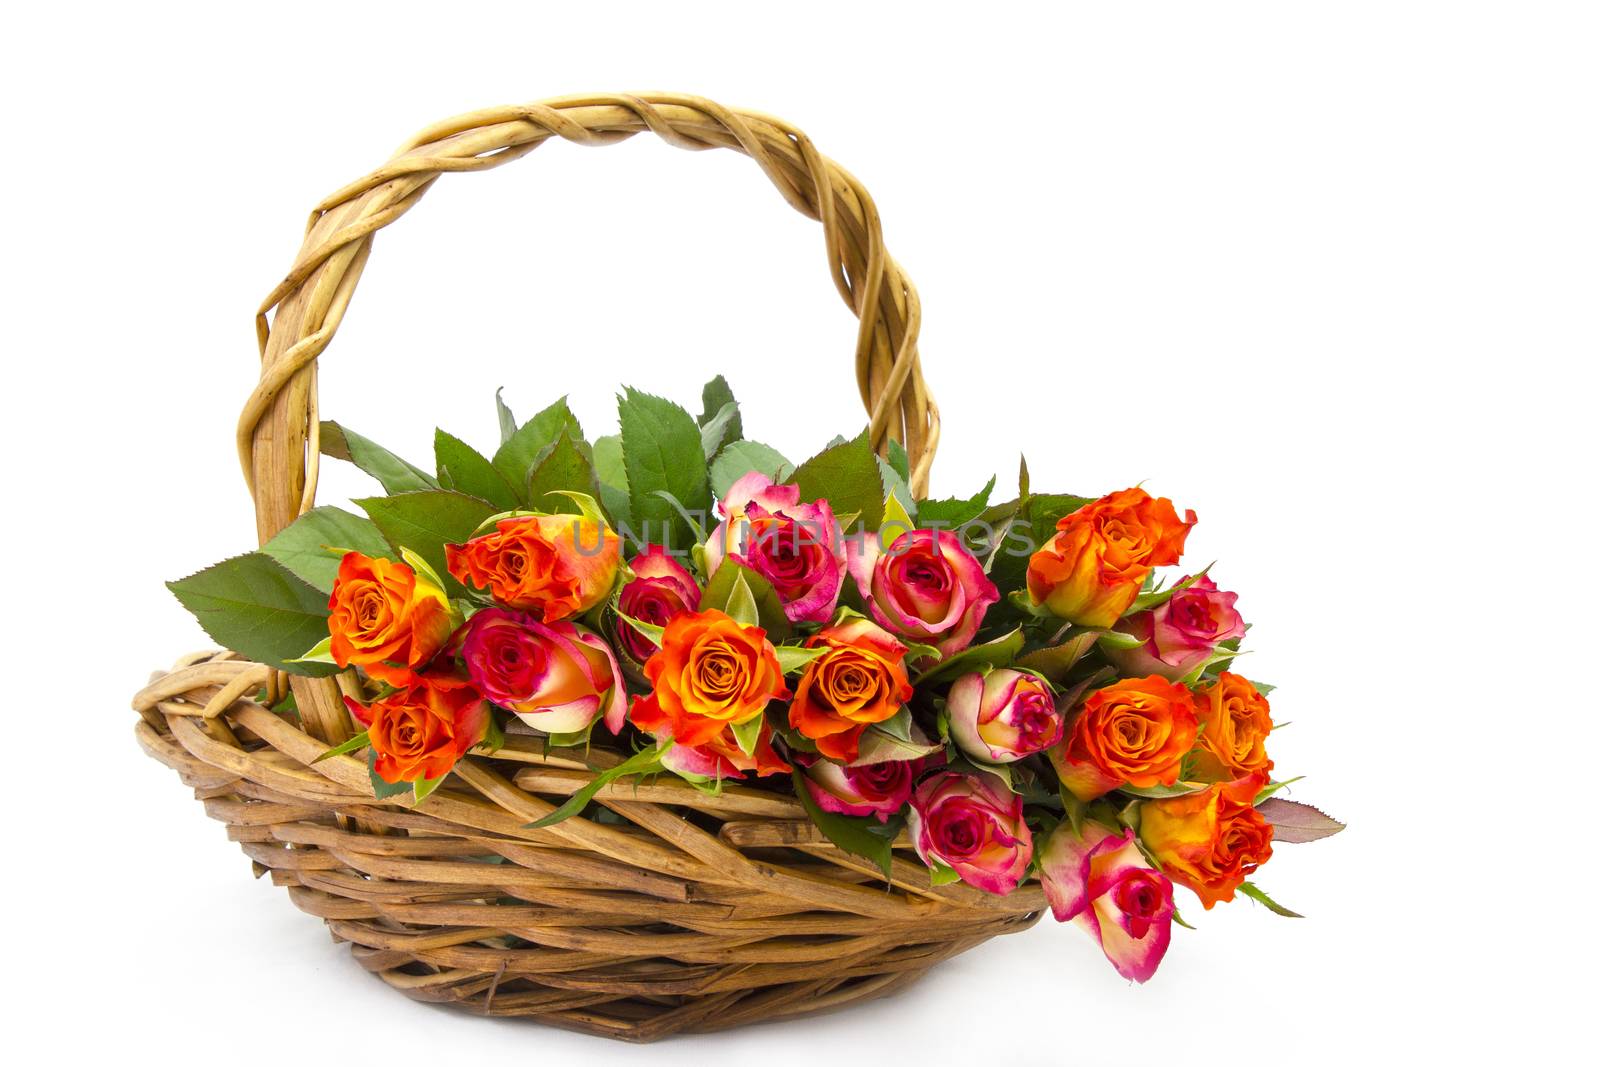 roses in a basket on white background